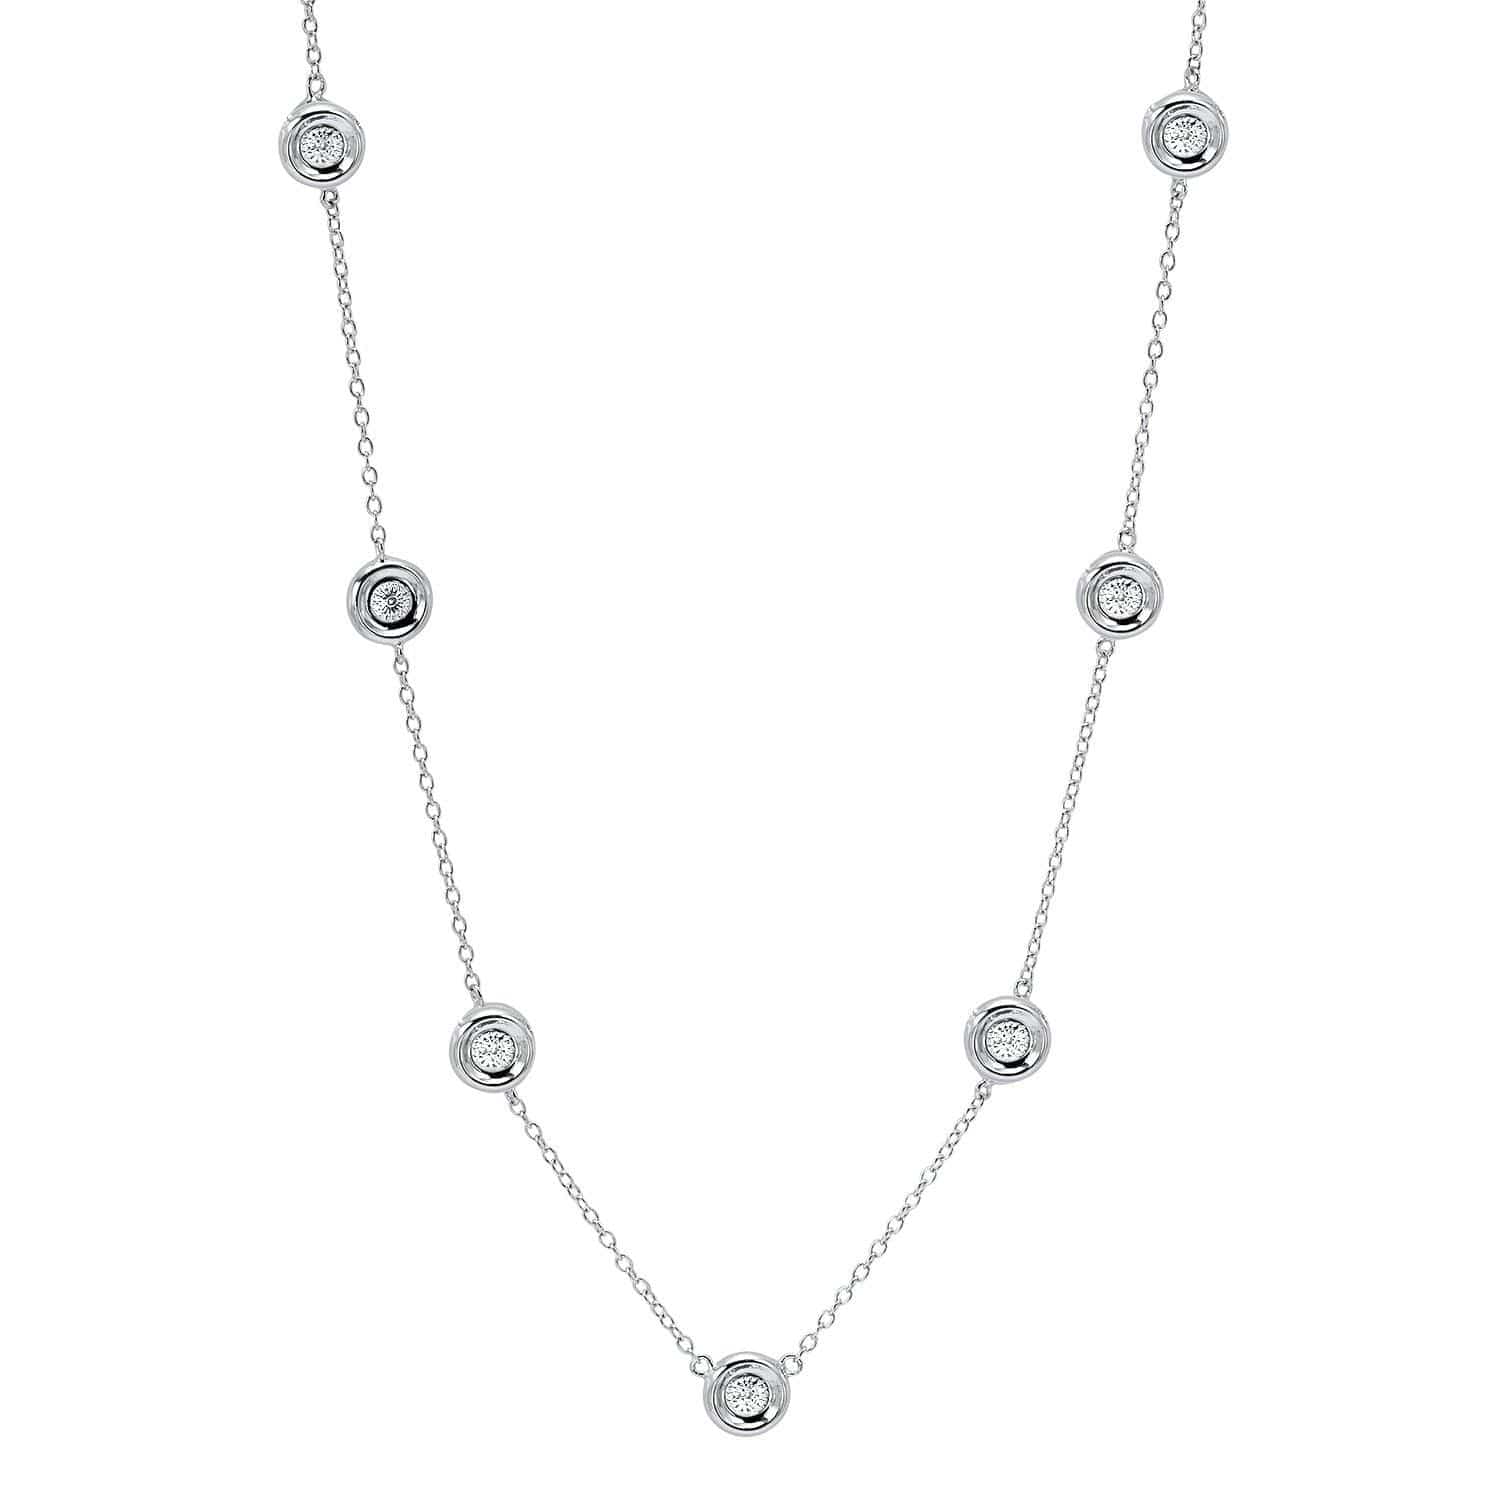 BW James Jewelers Necklace Silver Diamonds By The Yard Necklace